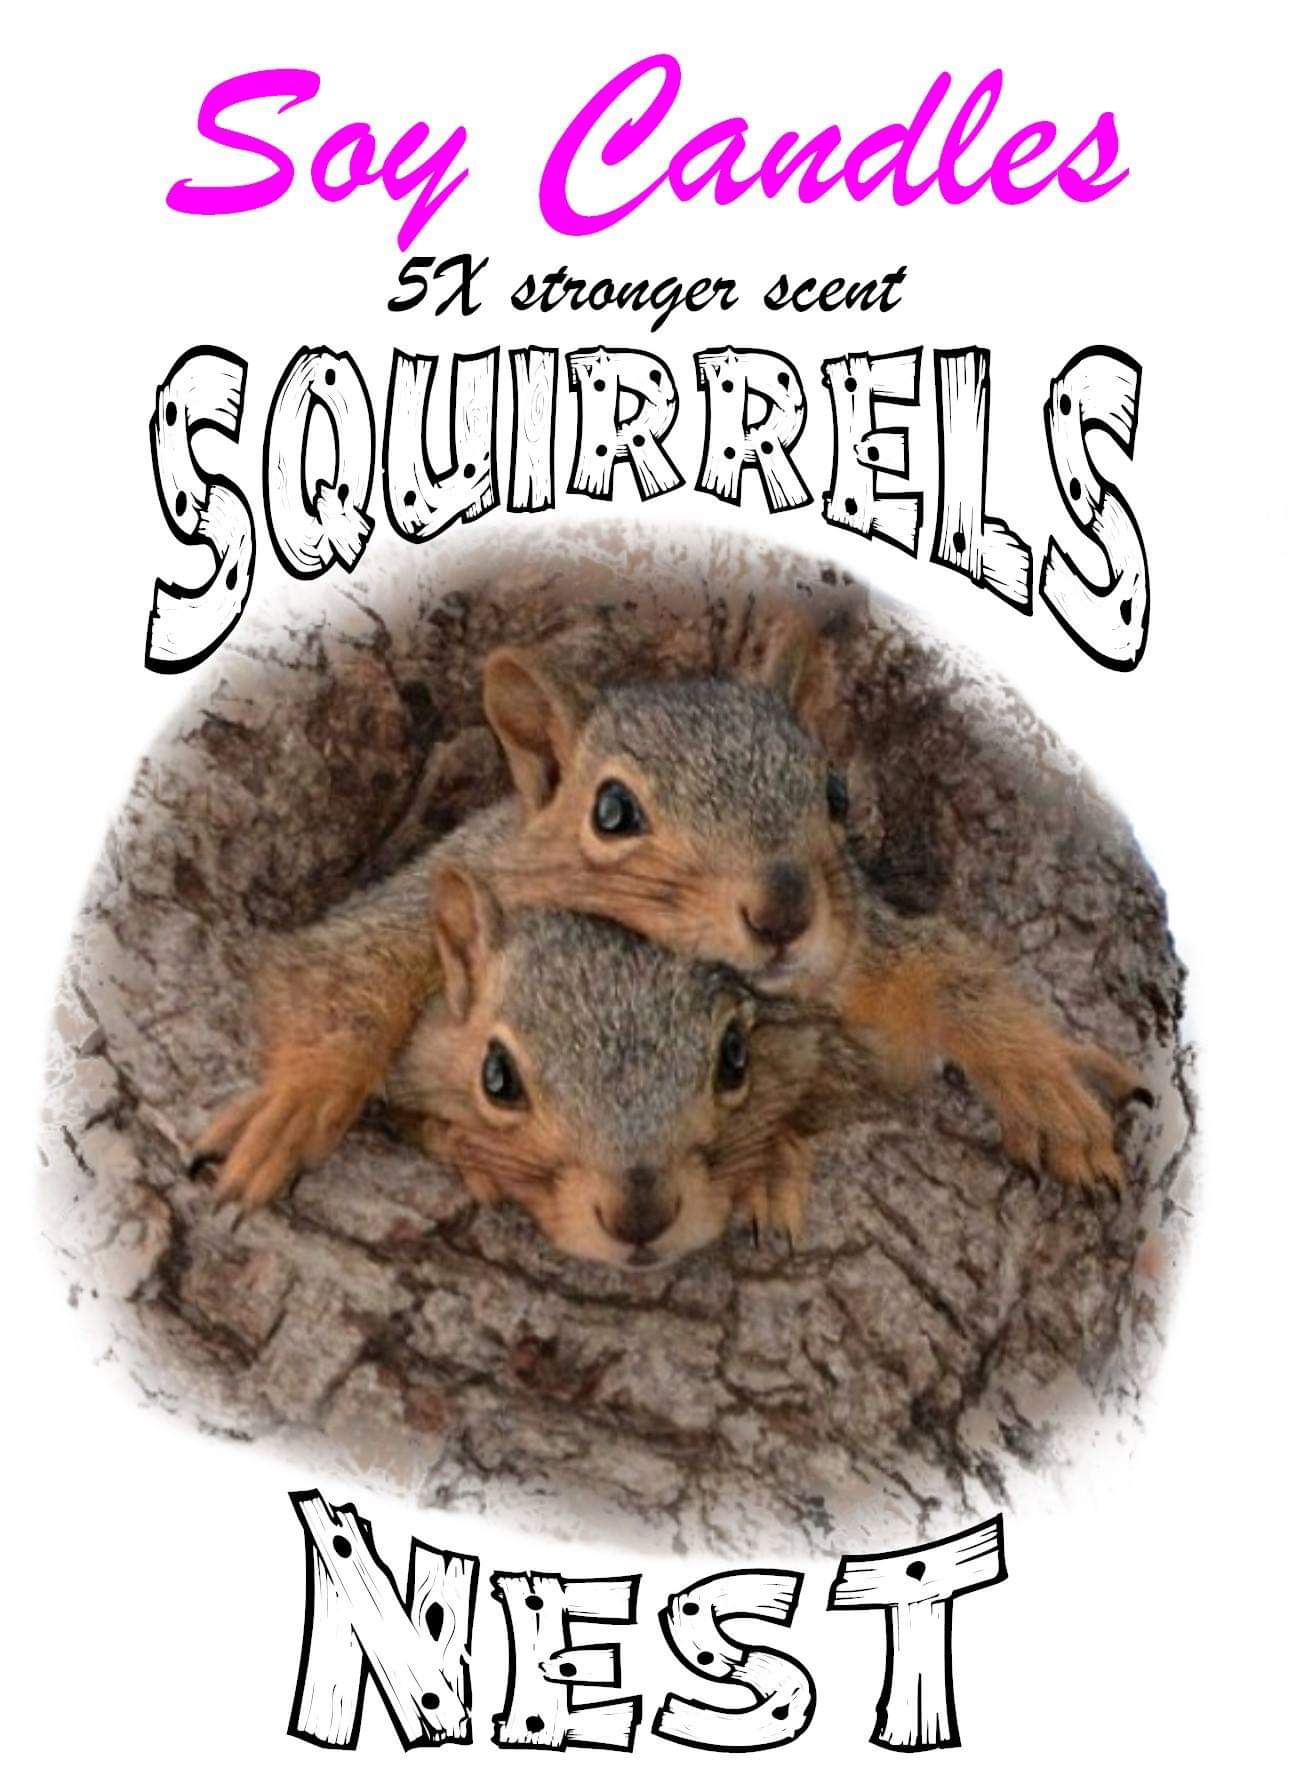 Squirrels Nest Soy Candles